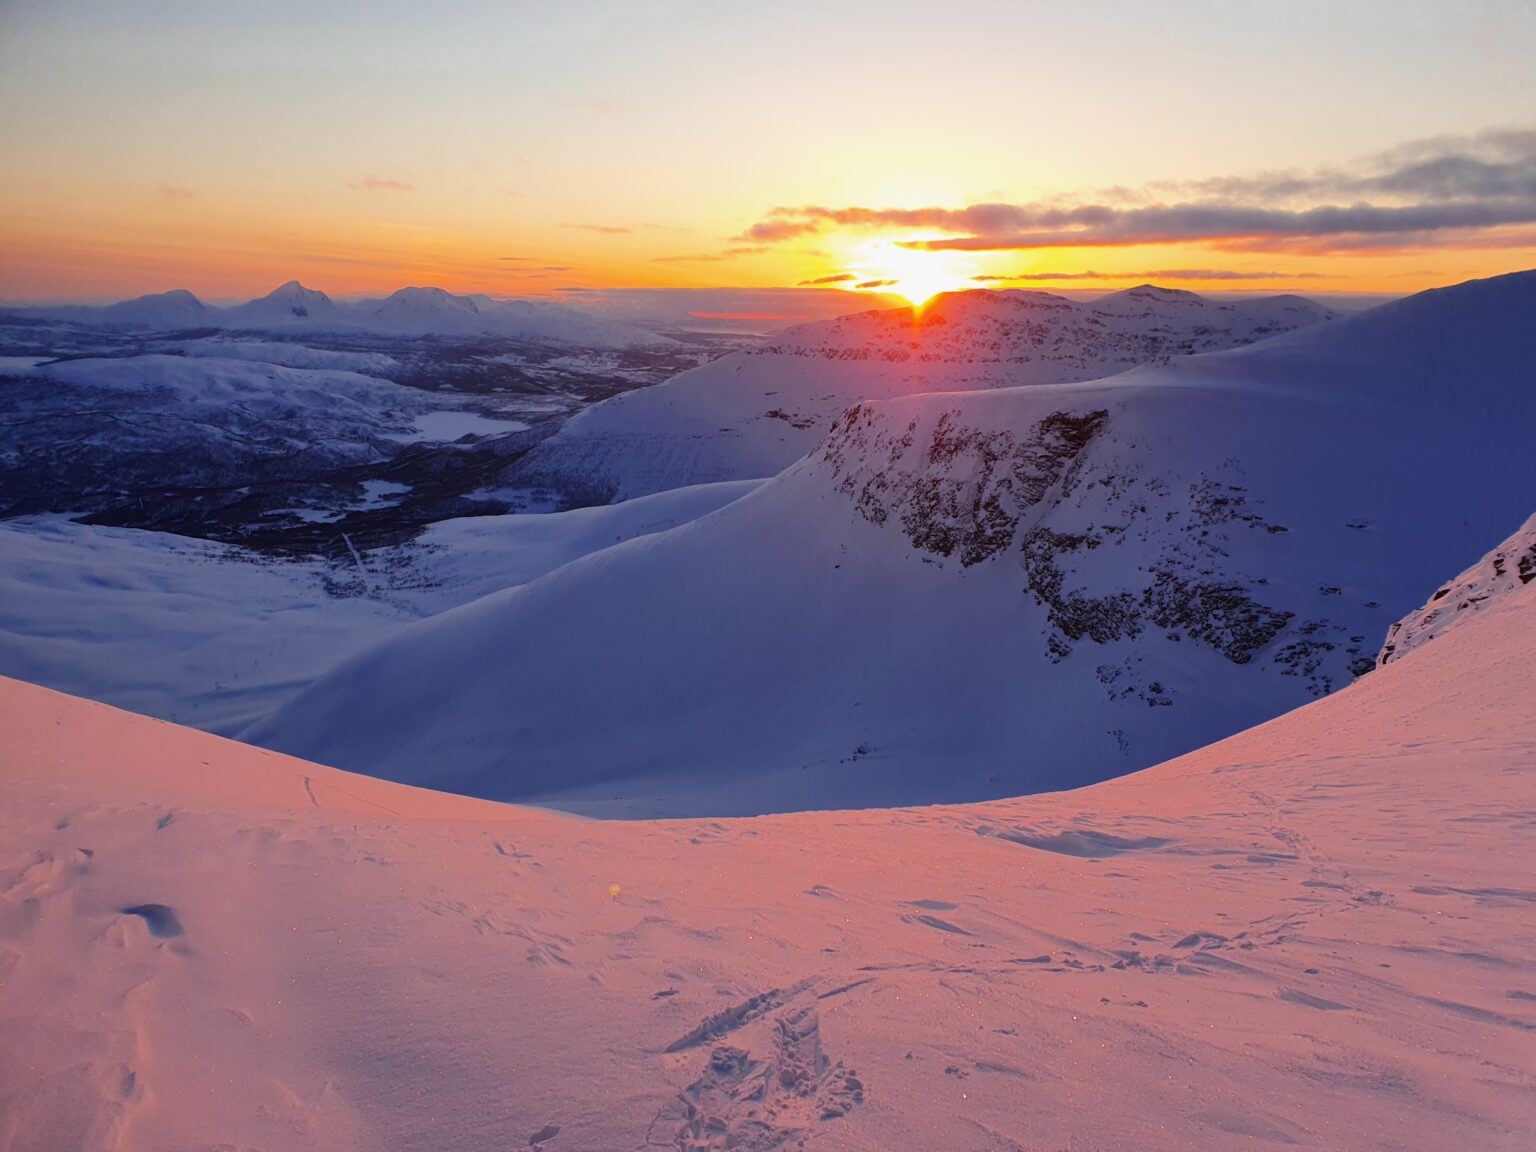 Watching the sunset in the Tamokdalen Backcountry